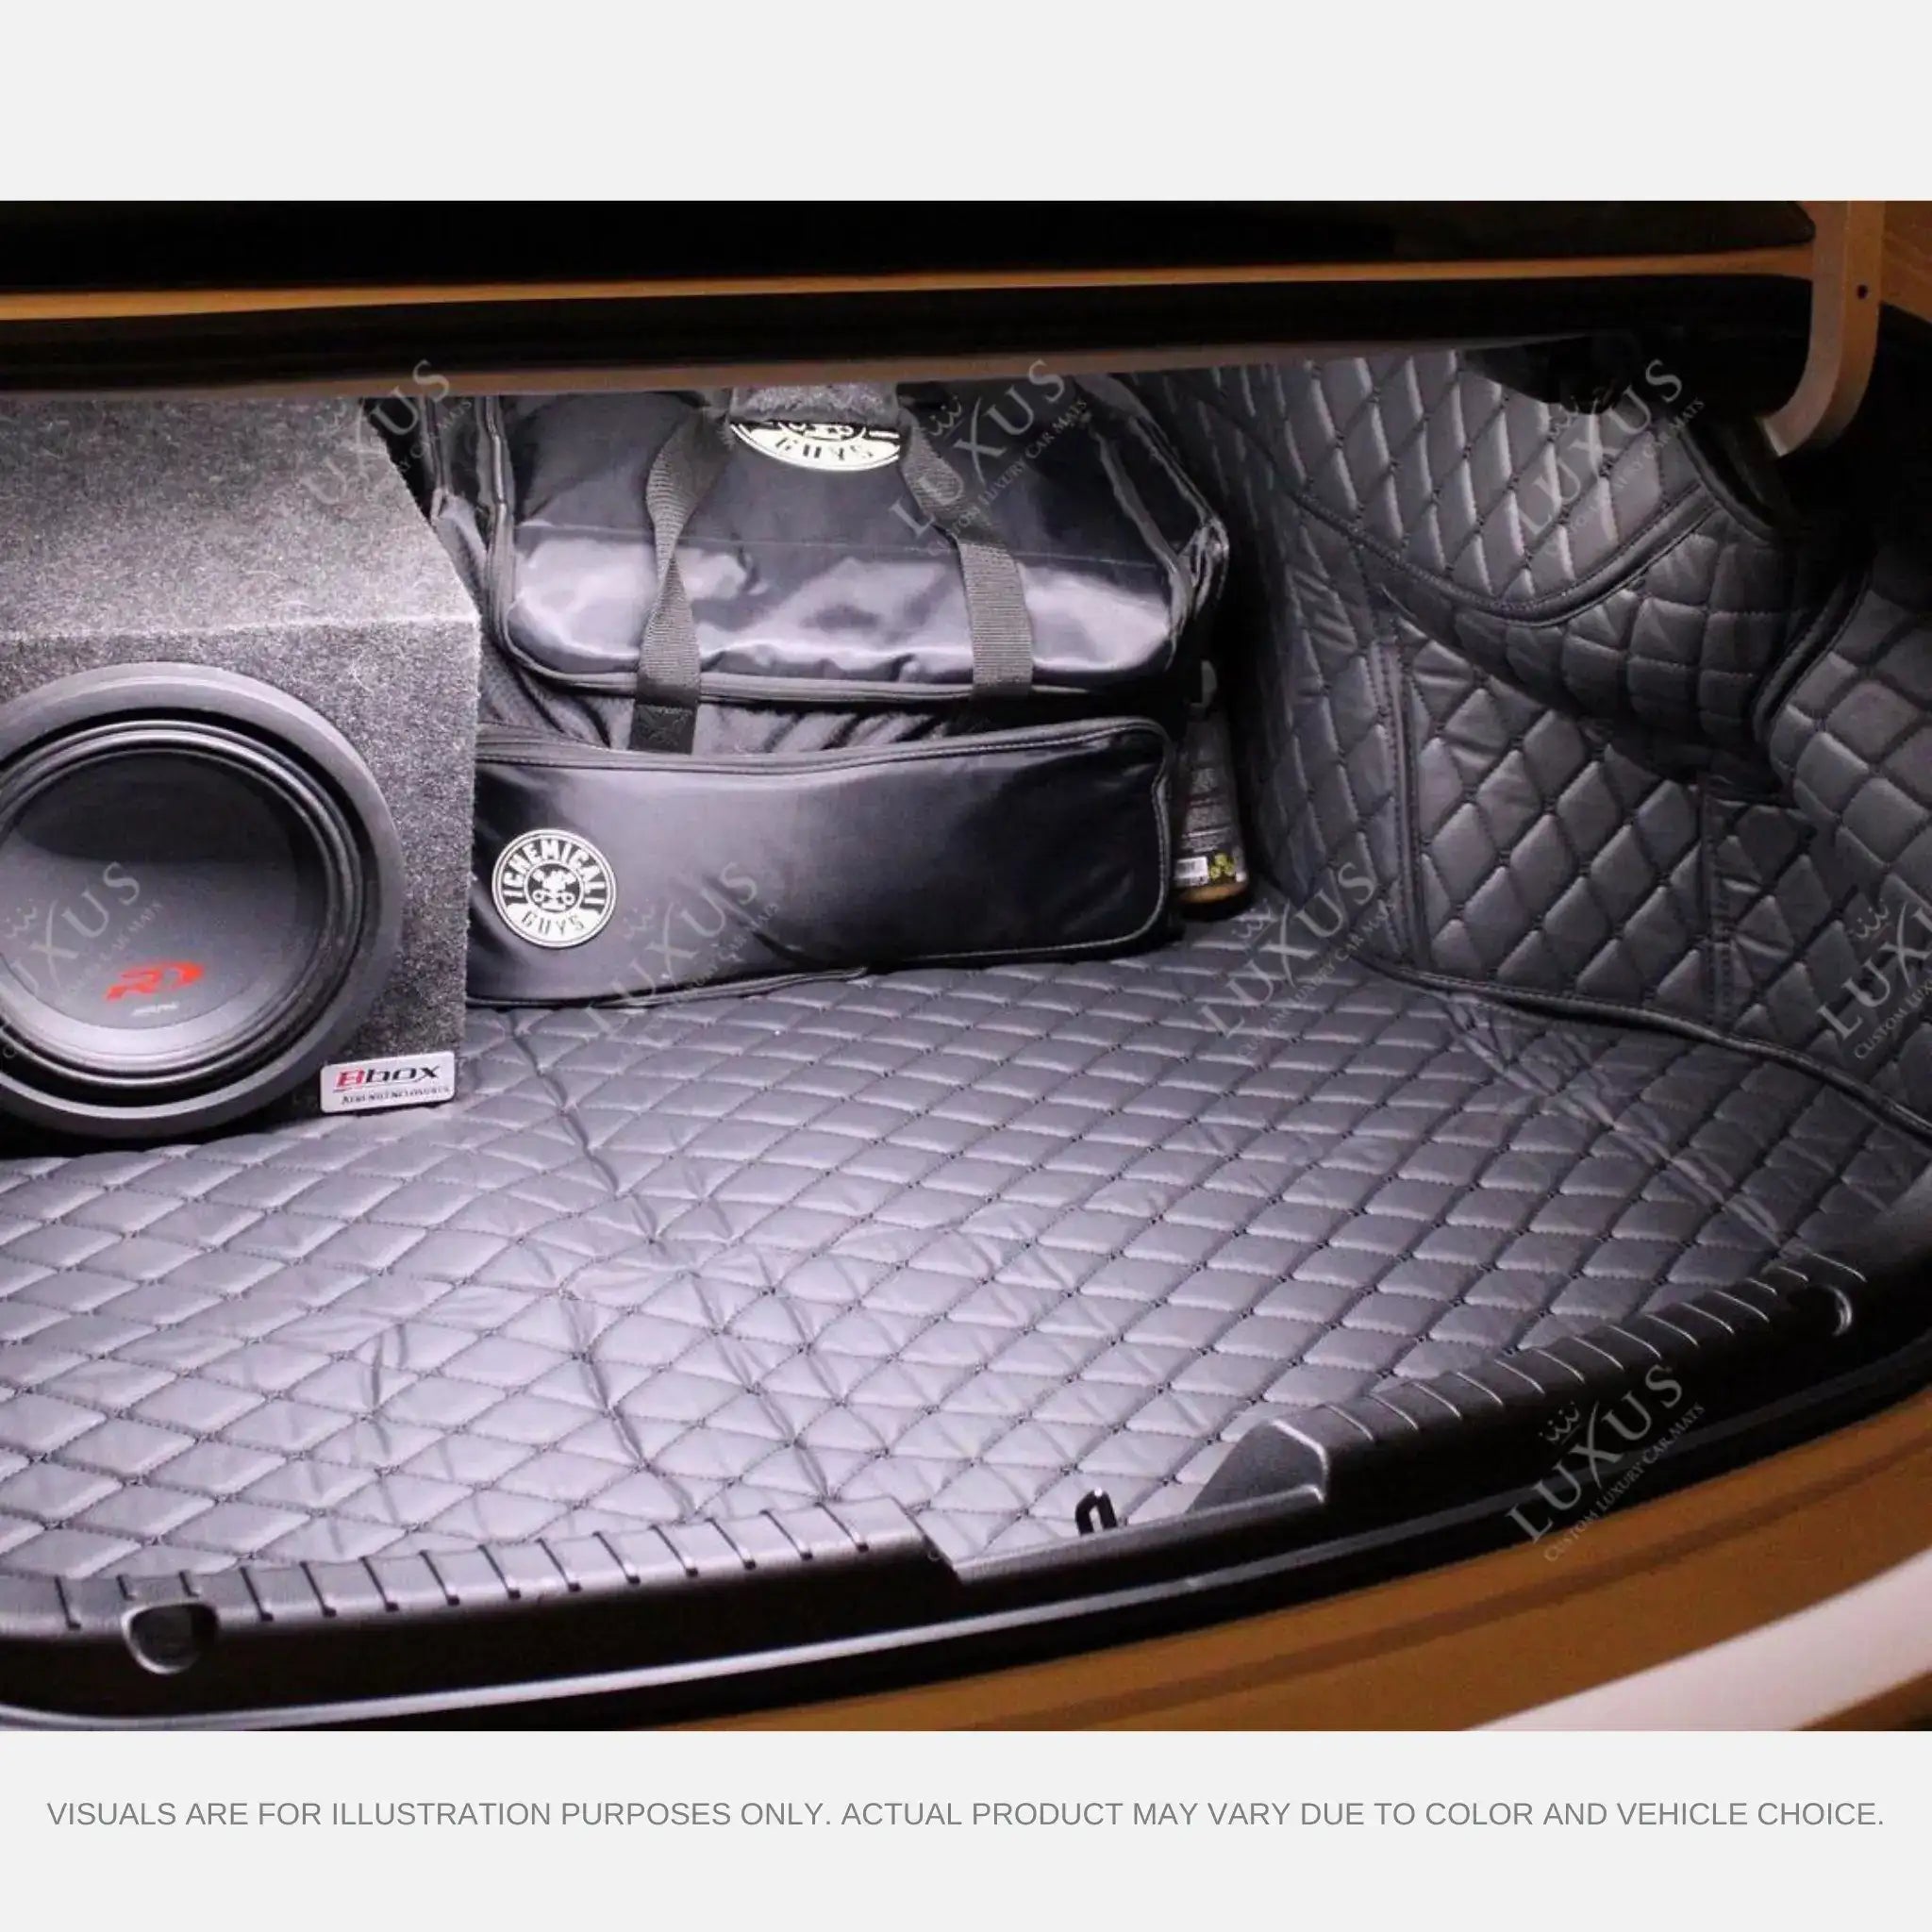 Trunk Mats For Car, Truck & SUV Luxus Car Mats Custom All-Weather  Waterproof Diamond Auto Boot Liner Carpets Rugs Brown